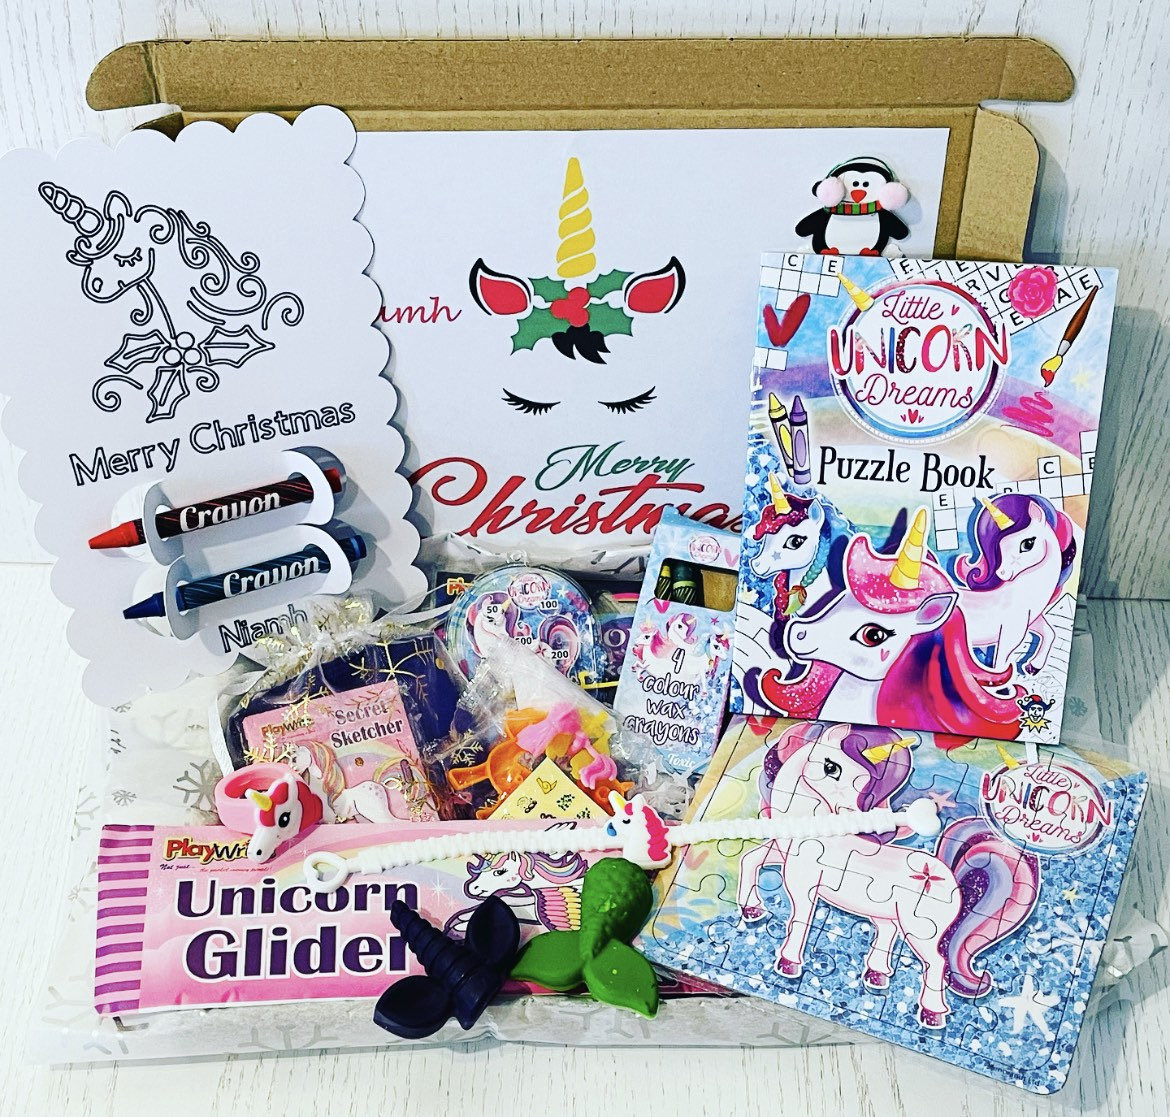 Personalised unicorn letter box gift. Perfect stocking filler. Filled with fun activities. #unicorn #unicornactivities #unicornlove #unicornchristmas #stockingfiller #christmasgift #christmas #personalised #etsy #specialgifts58foryou specialgifts58foryou.etsy.com/listing/101501…